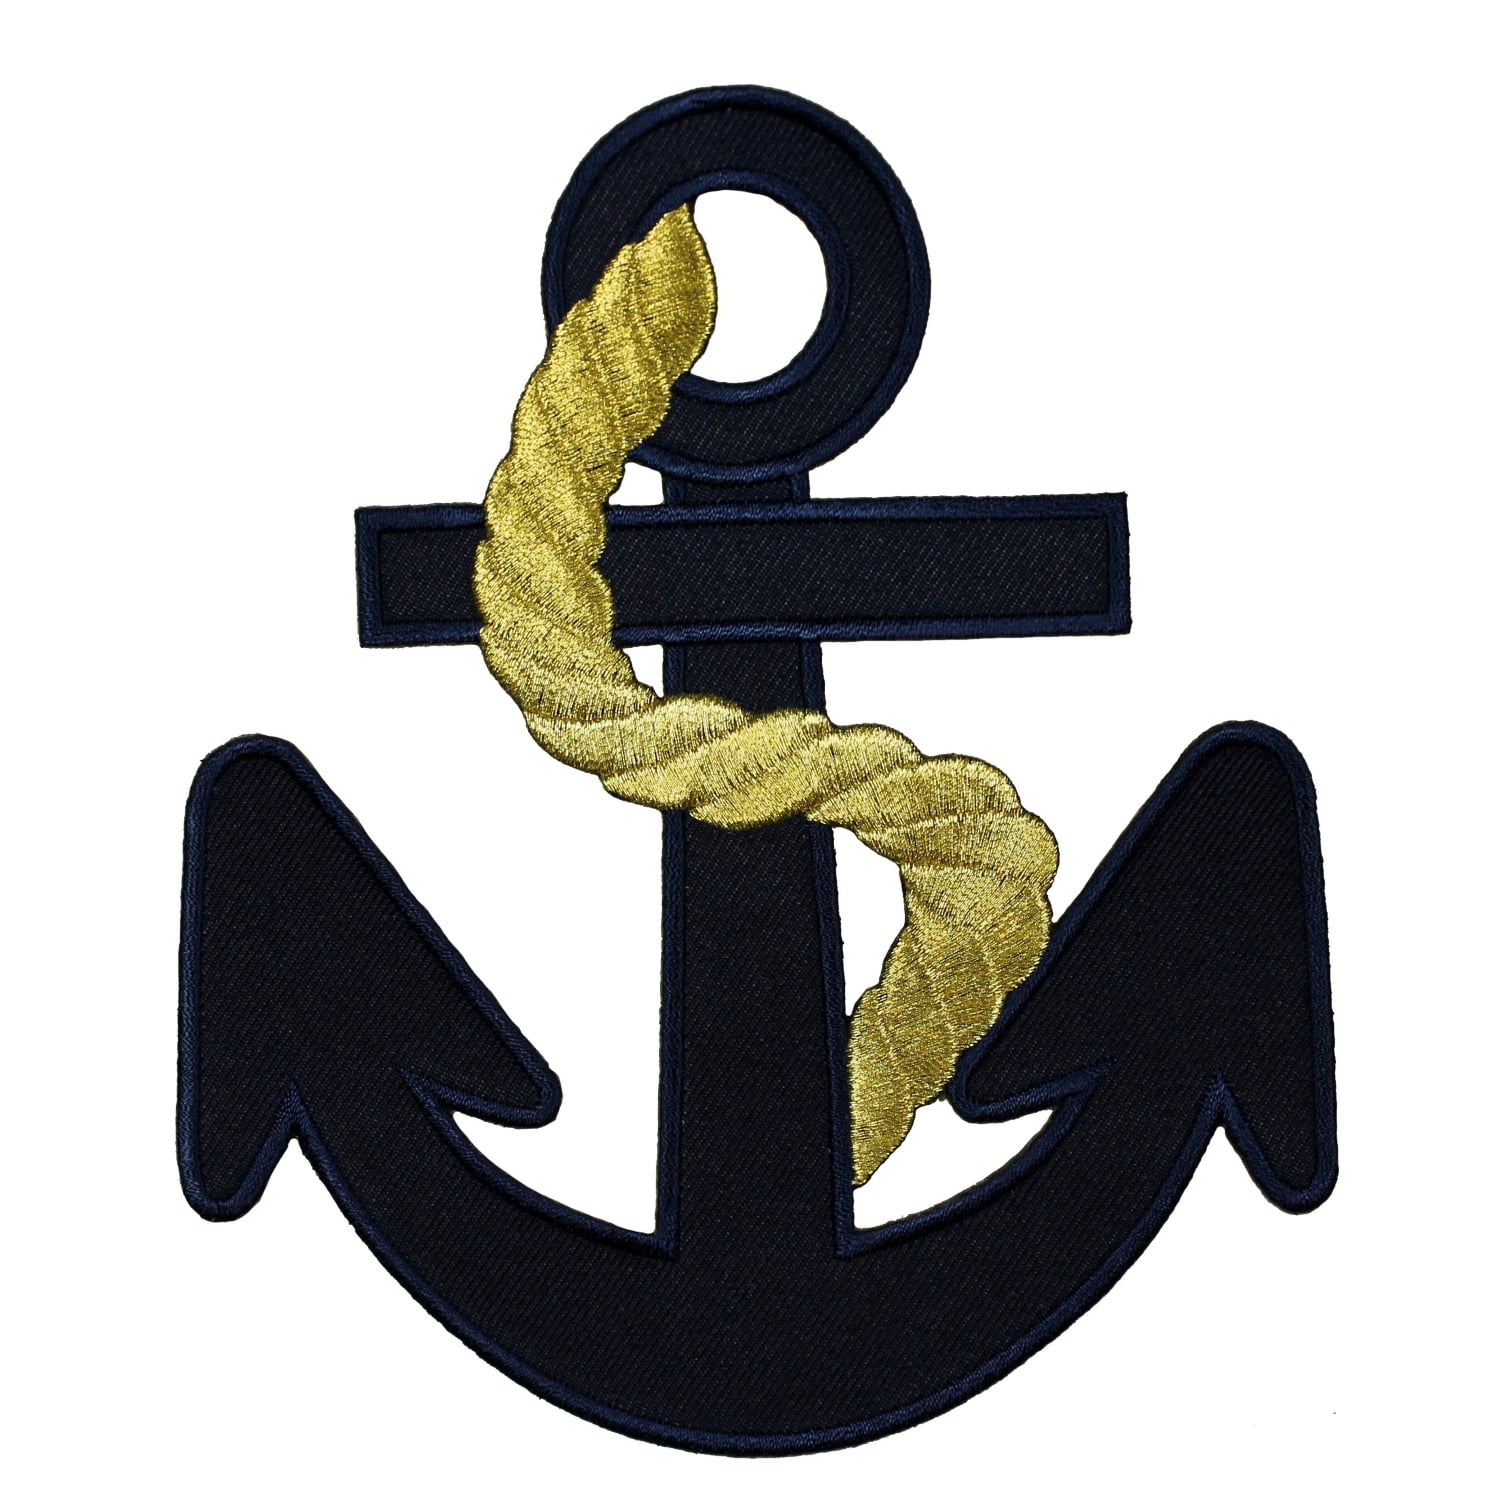 2 Gold Anchor Iron On Appliques  Fully Embroidered  Measures 1 12 high x 1 wide approximately